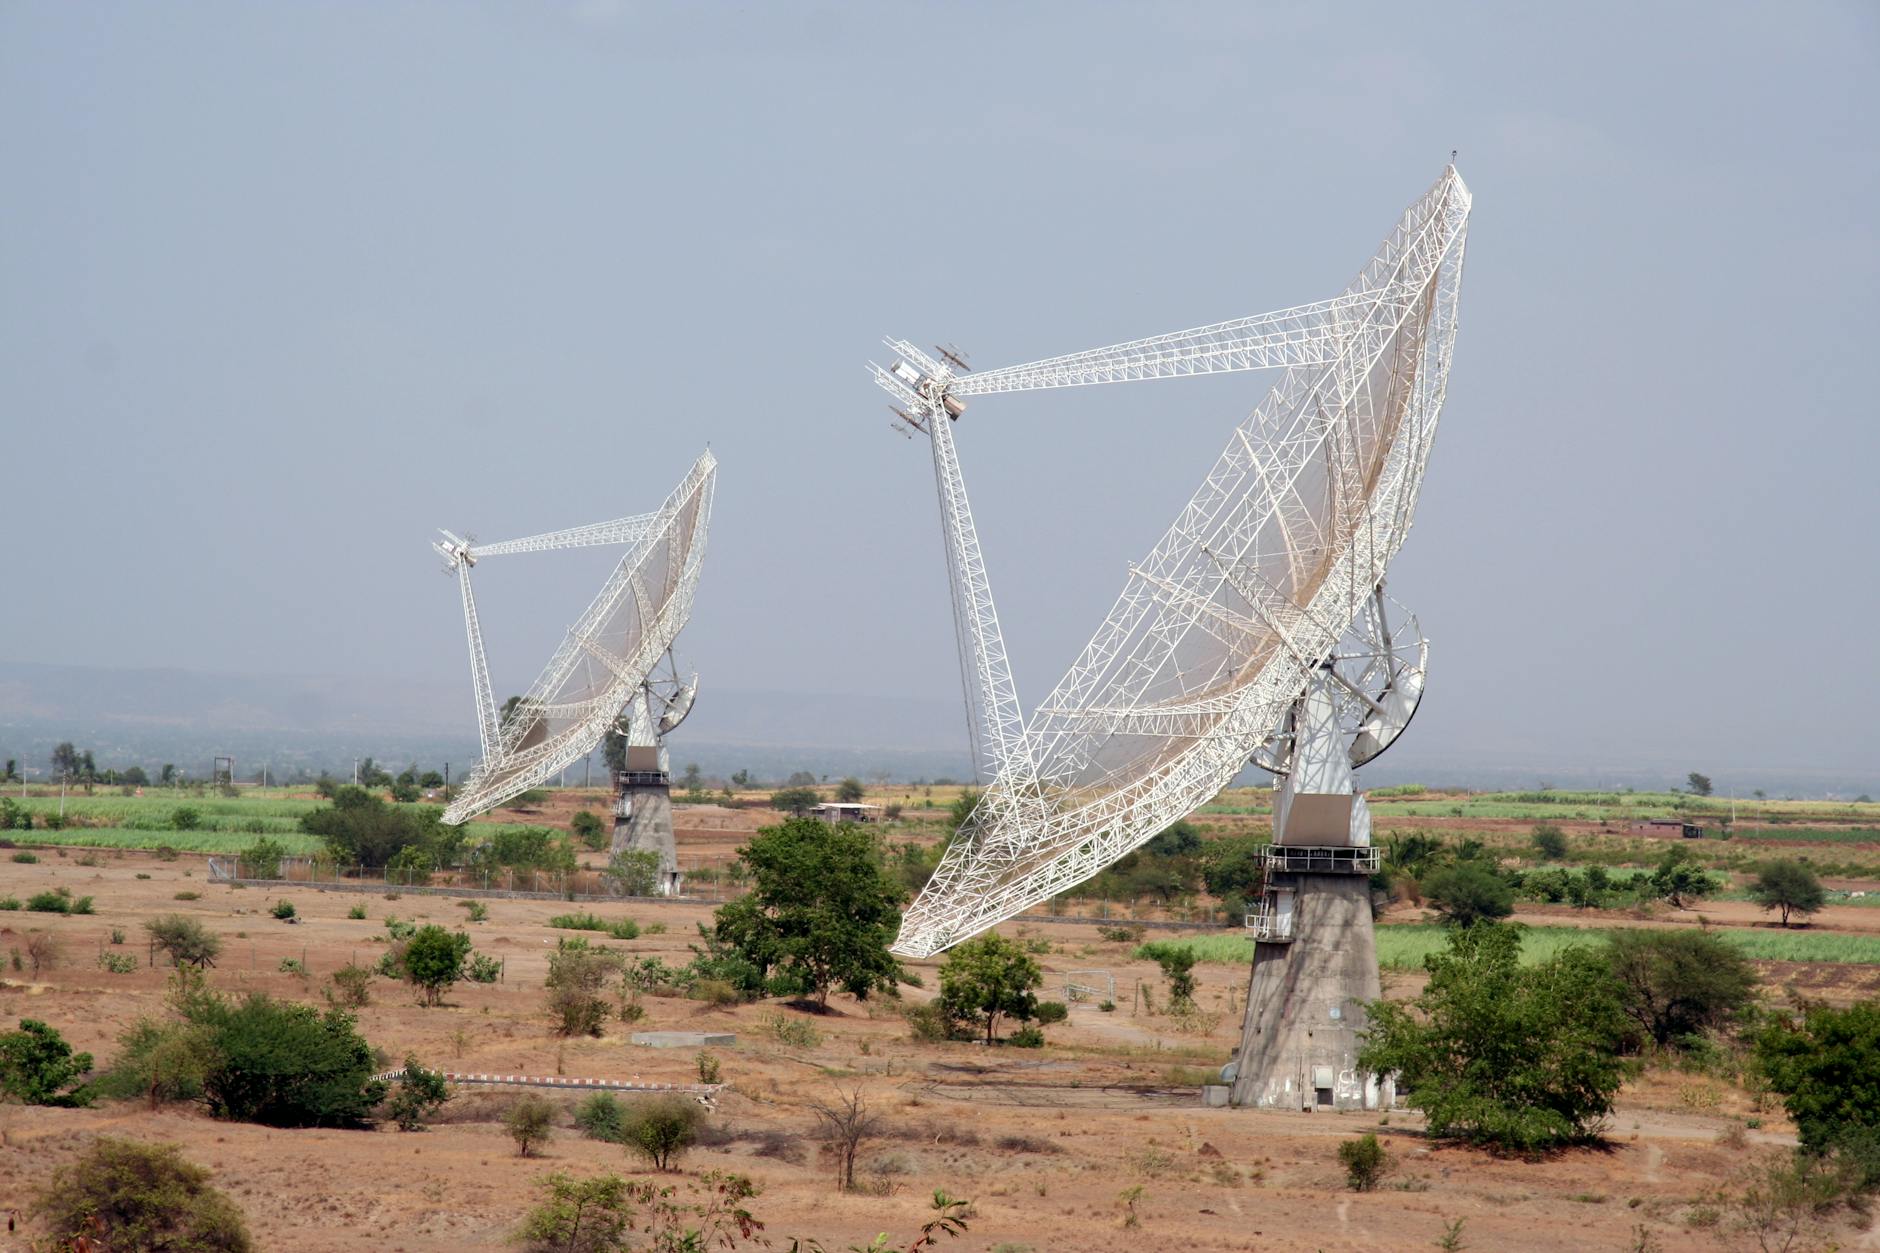 large antennas on a field